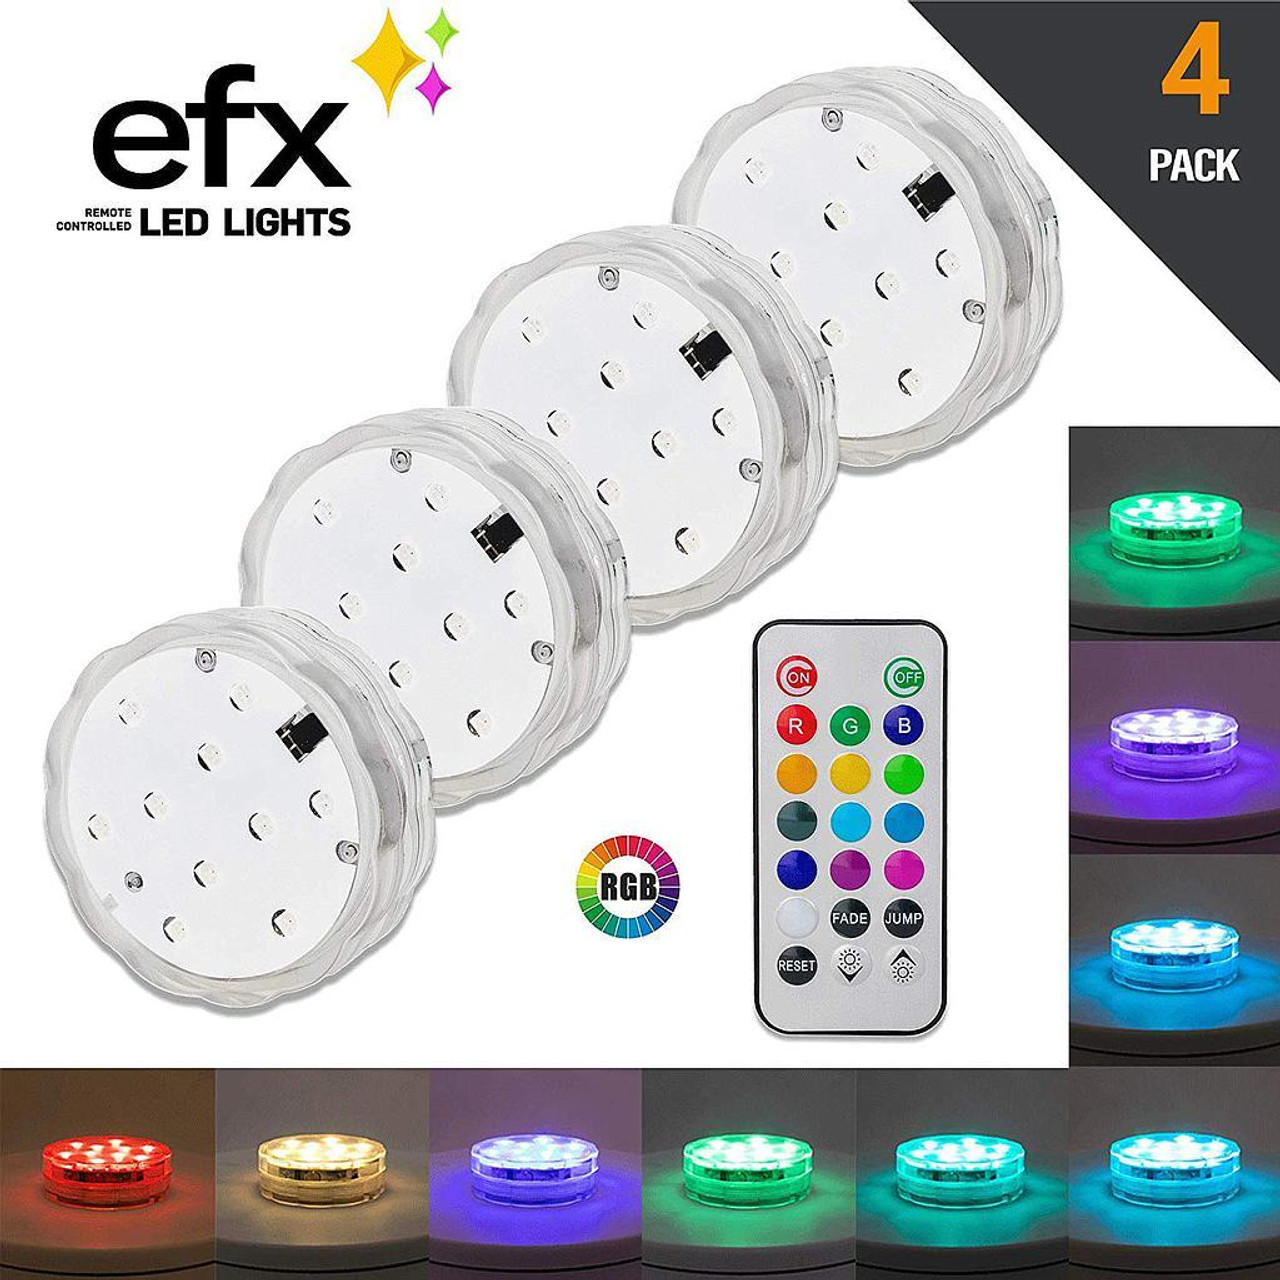 LUMN8 EFX Submersible Remote Controlled LED Lights NEW 